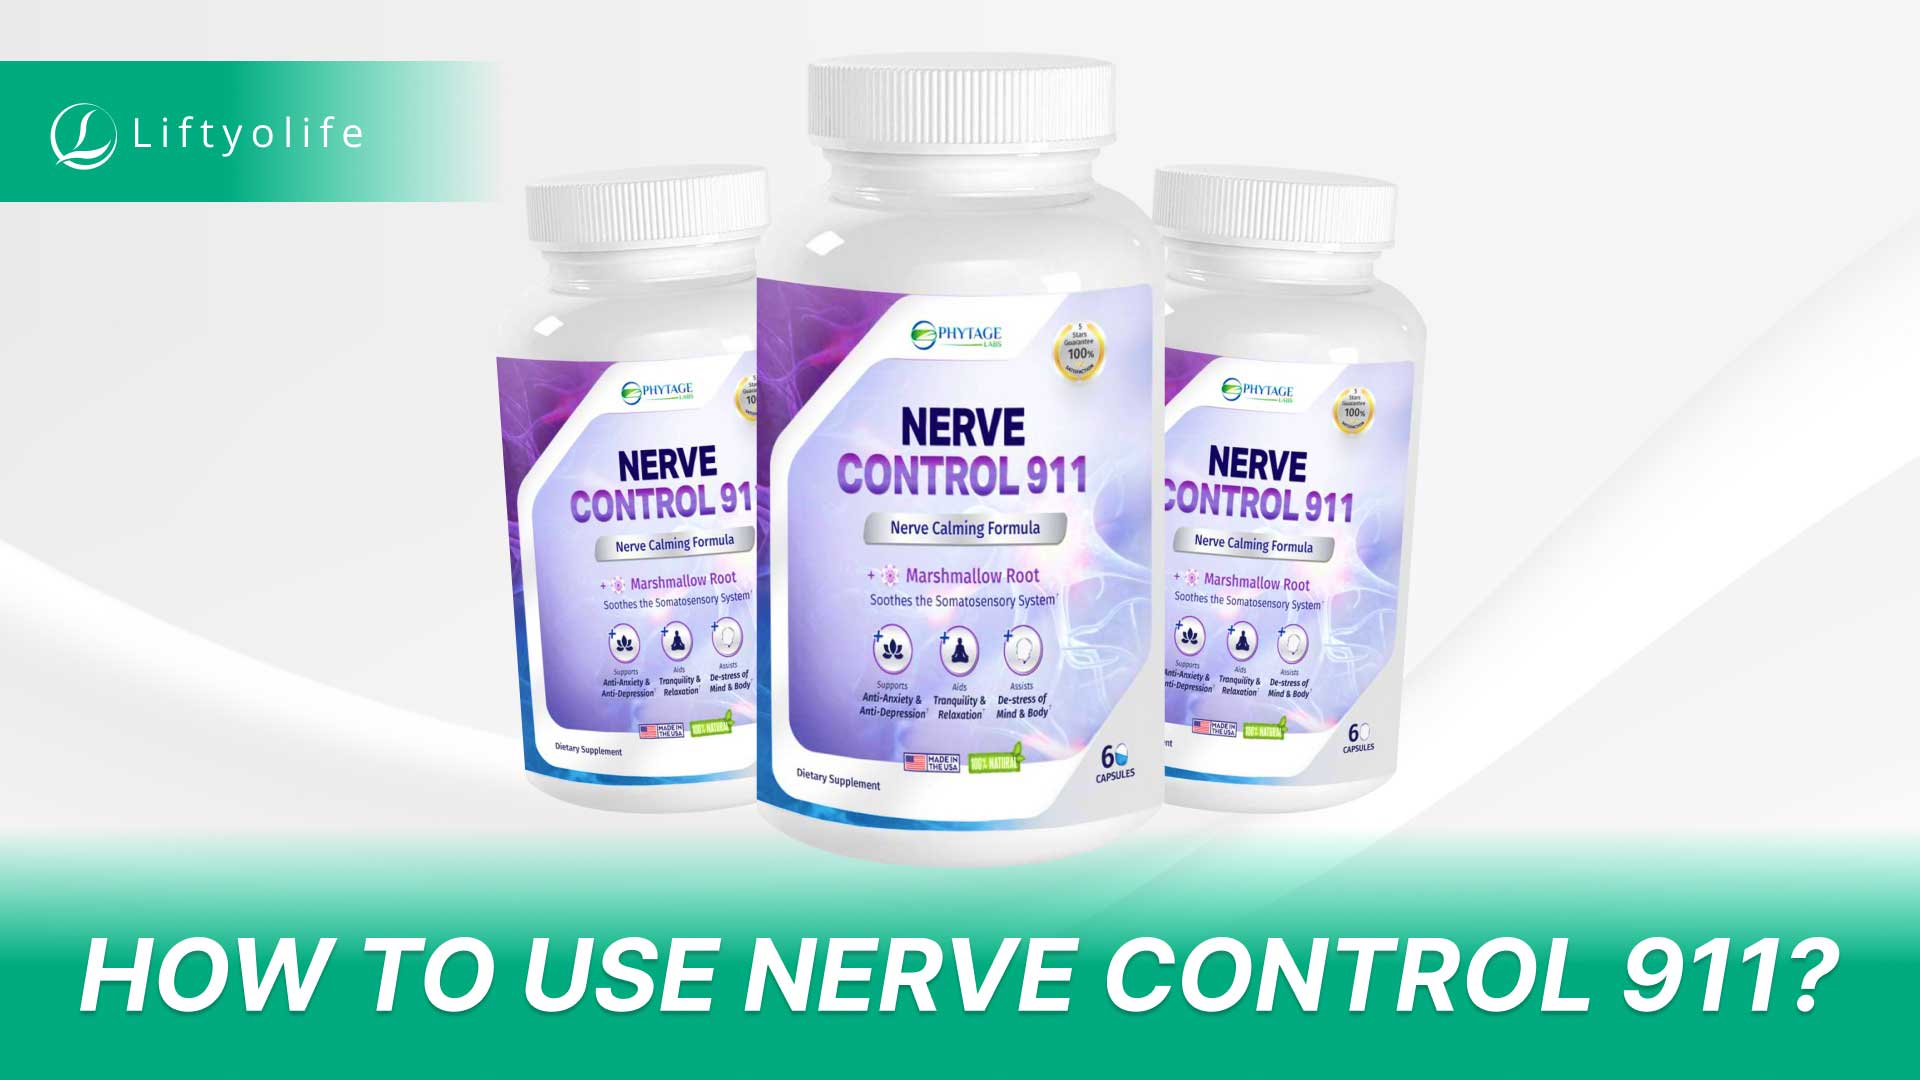 How To Use Nerve Control 911?